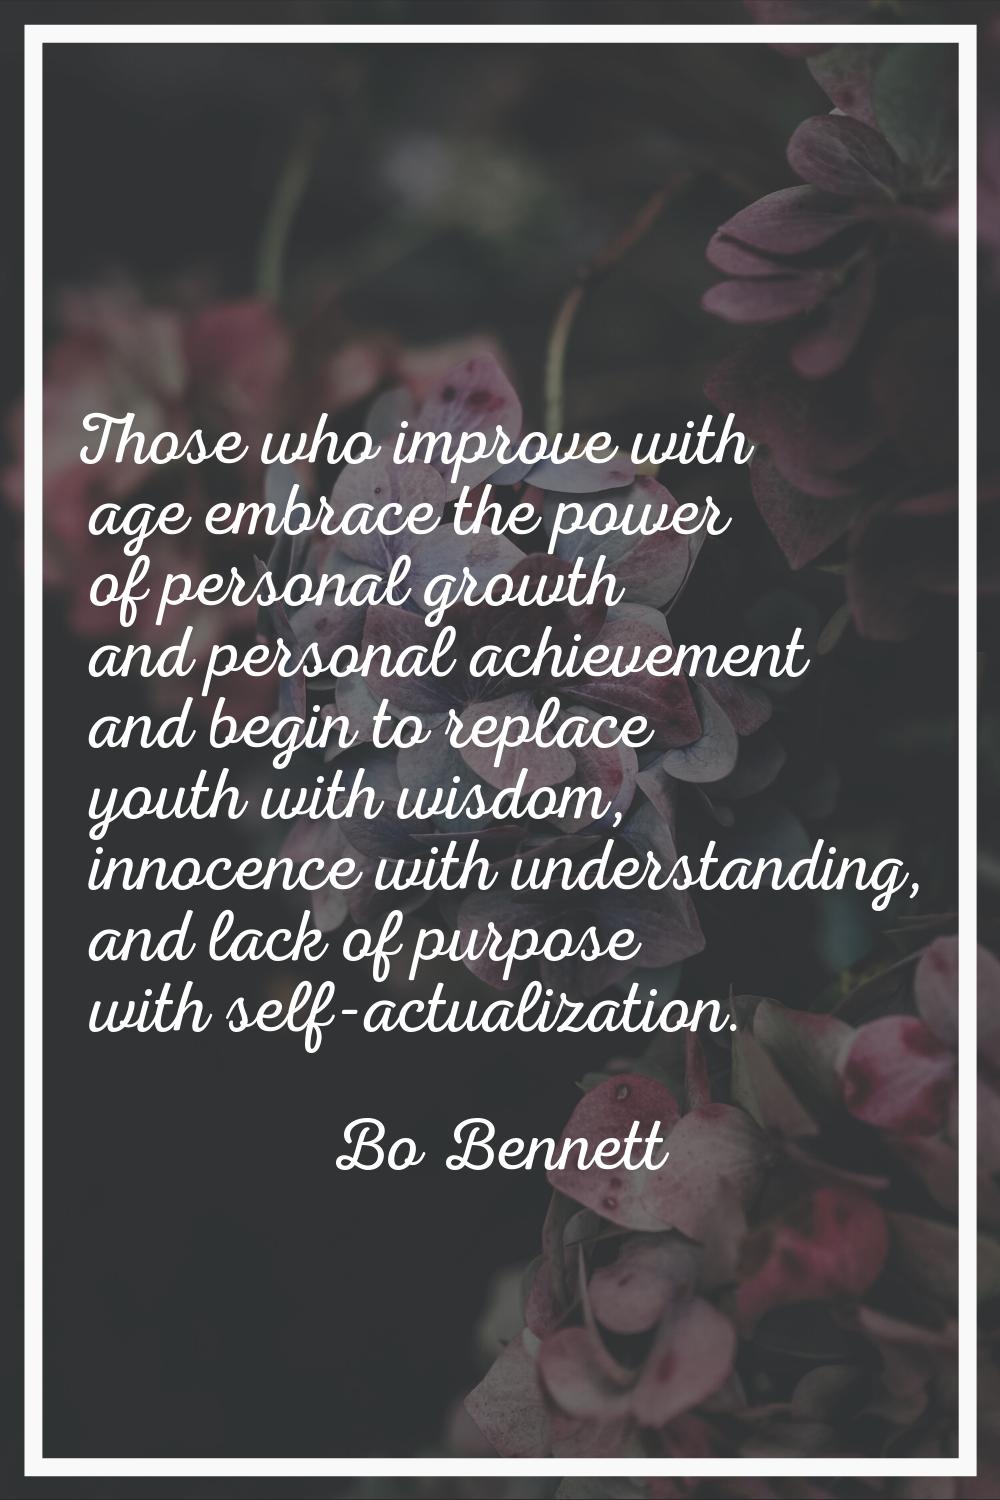 Those who improve with age embrace the power of personal growth and personal achievement and begin 